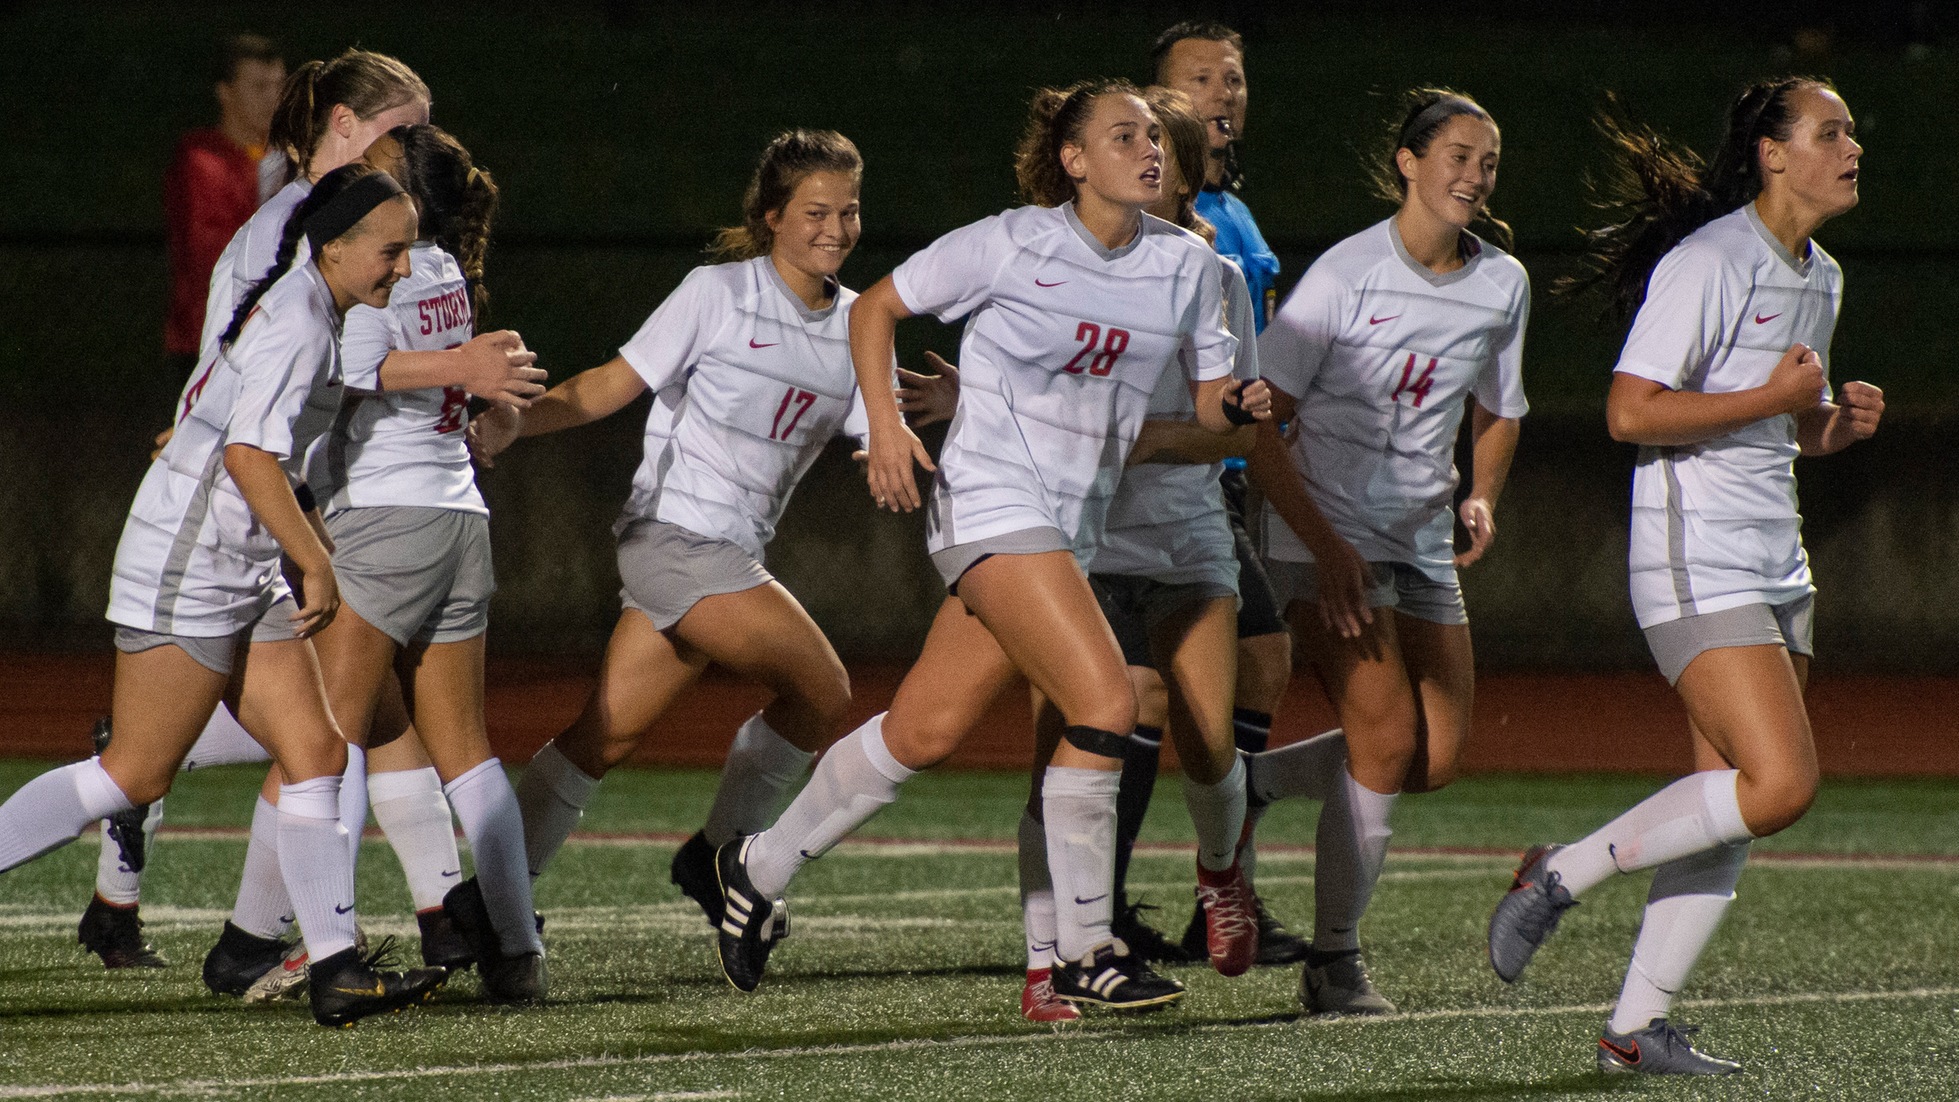 The Storm celebrate an 86th-minute goal by Lizzie Arnburg to tie the game at 2-2 against Wartburg.